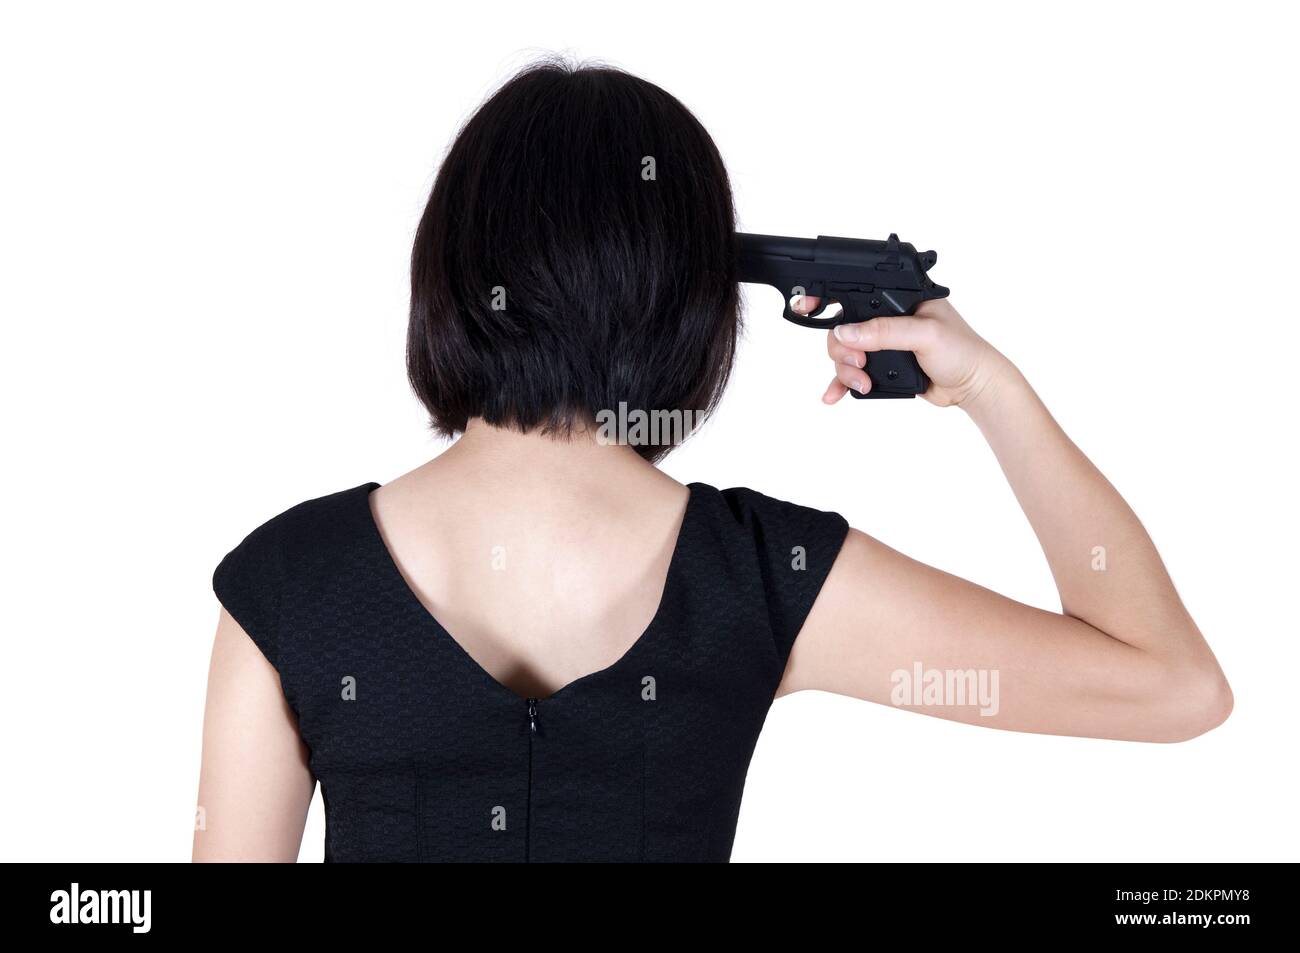 rear-view-of-woman-holding-gun-to-head-standing-against-white-background-2DKPMY8.jpg